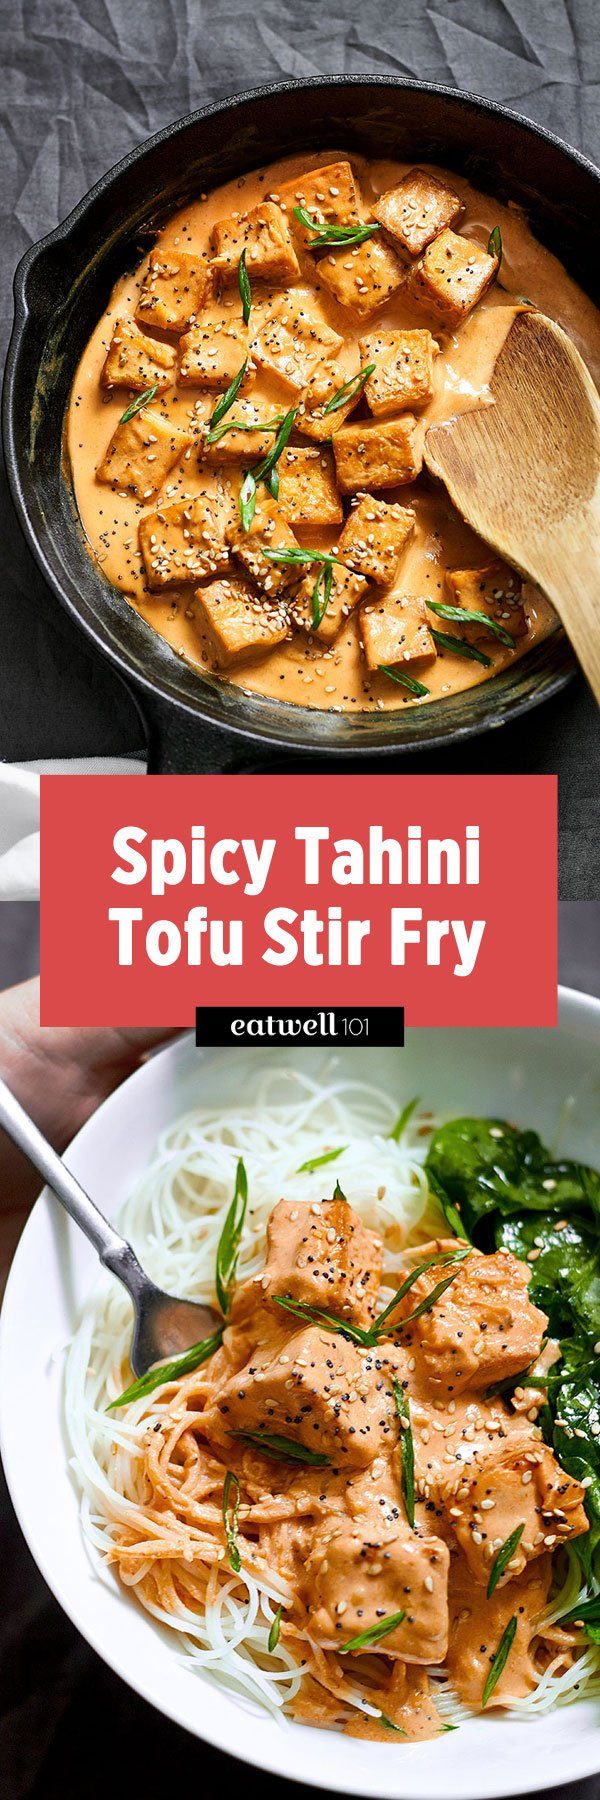 Spicy Tahini Tofu Stir Fry - #tofu #stirfry #recipe #eatwell101 - Try our tofu stir fry recipe and dinner will be done before you know it!